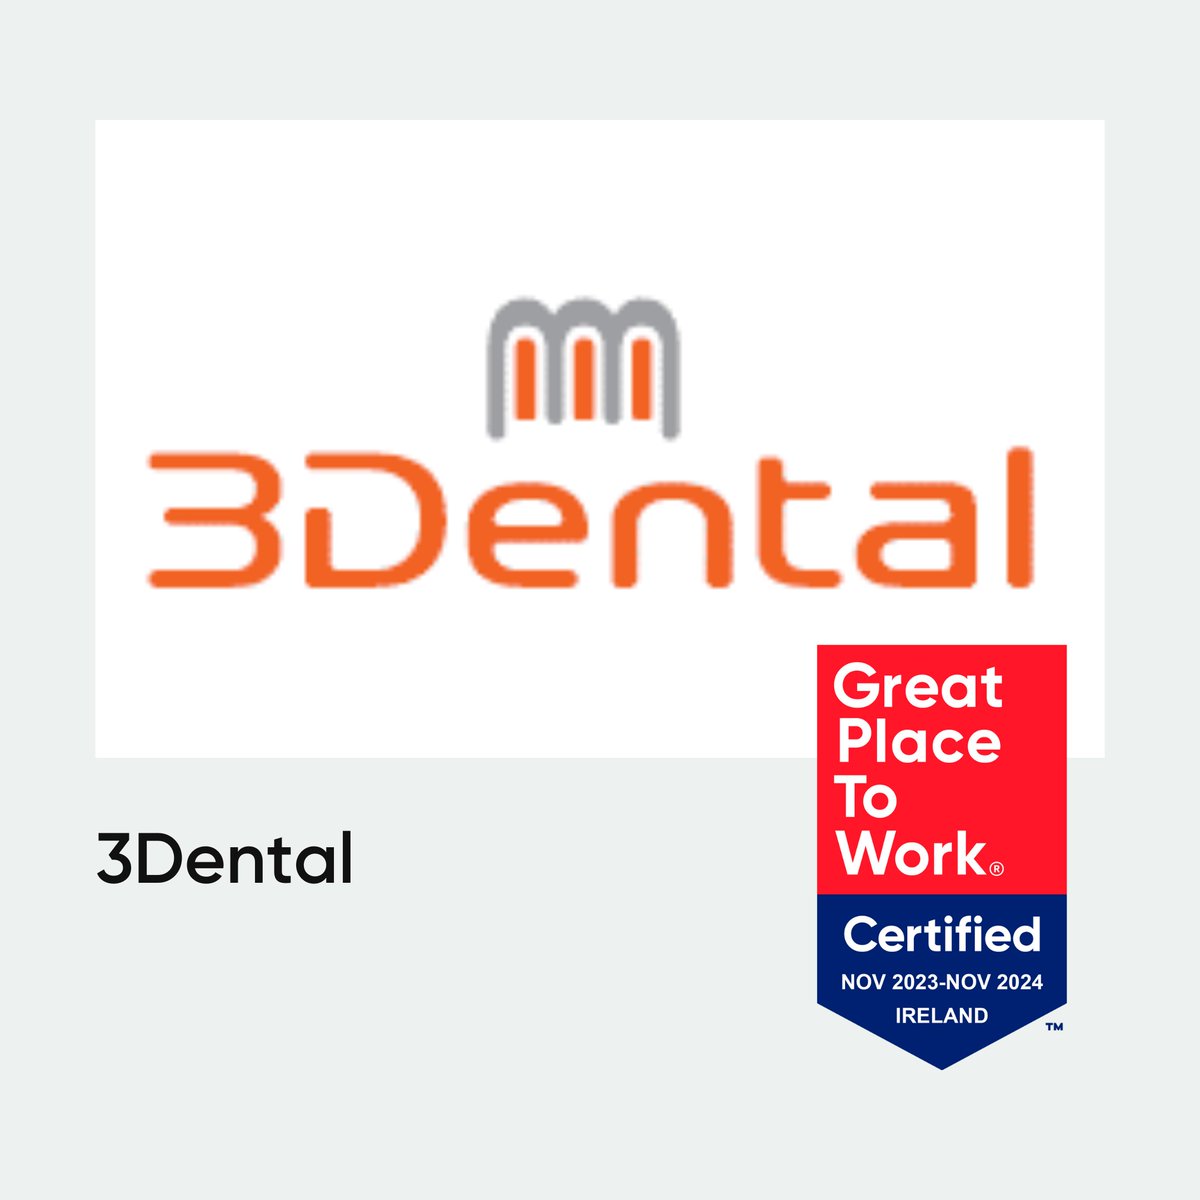 CERTIFICATION 🏅| Congratulations to @3DentalIreland for being Certified™ as a #greatplacetowork again! Well done to the team for this amazing achievement! 

Check out their Great culture  👉  hubs.li/Q02jgylb0

#gptw #gptwcertified #certifiedgreat